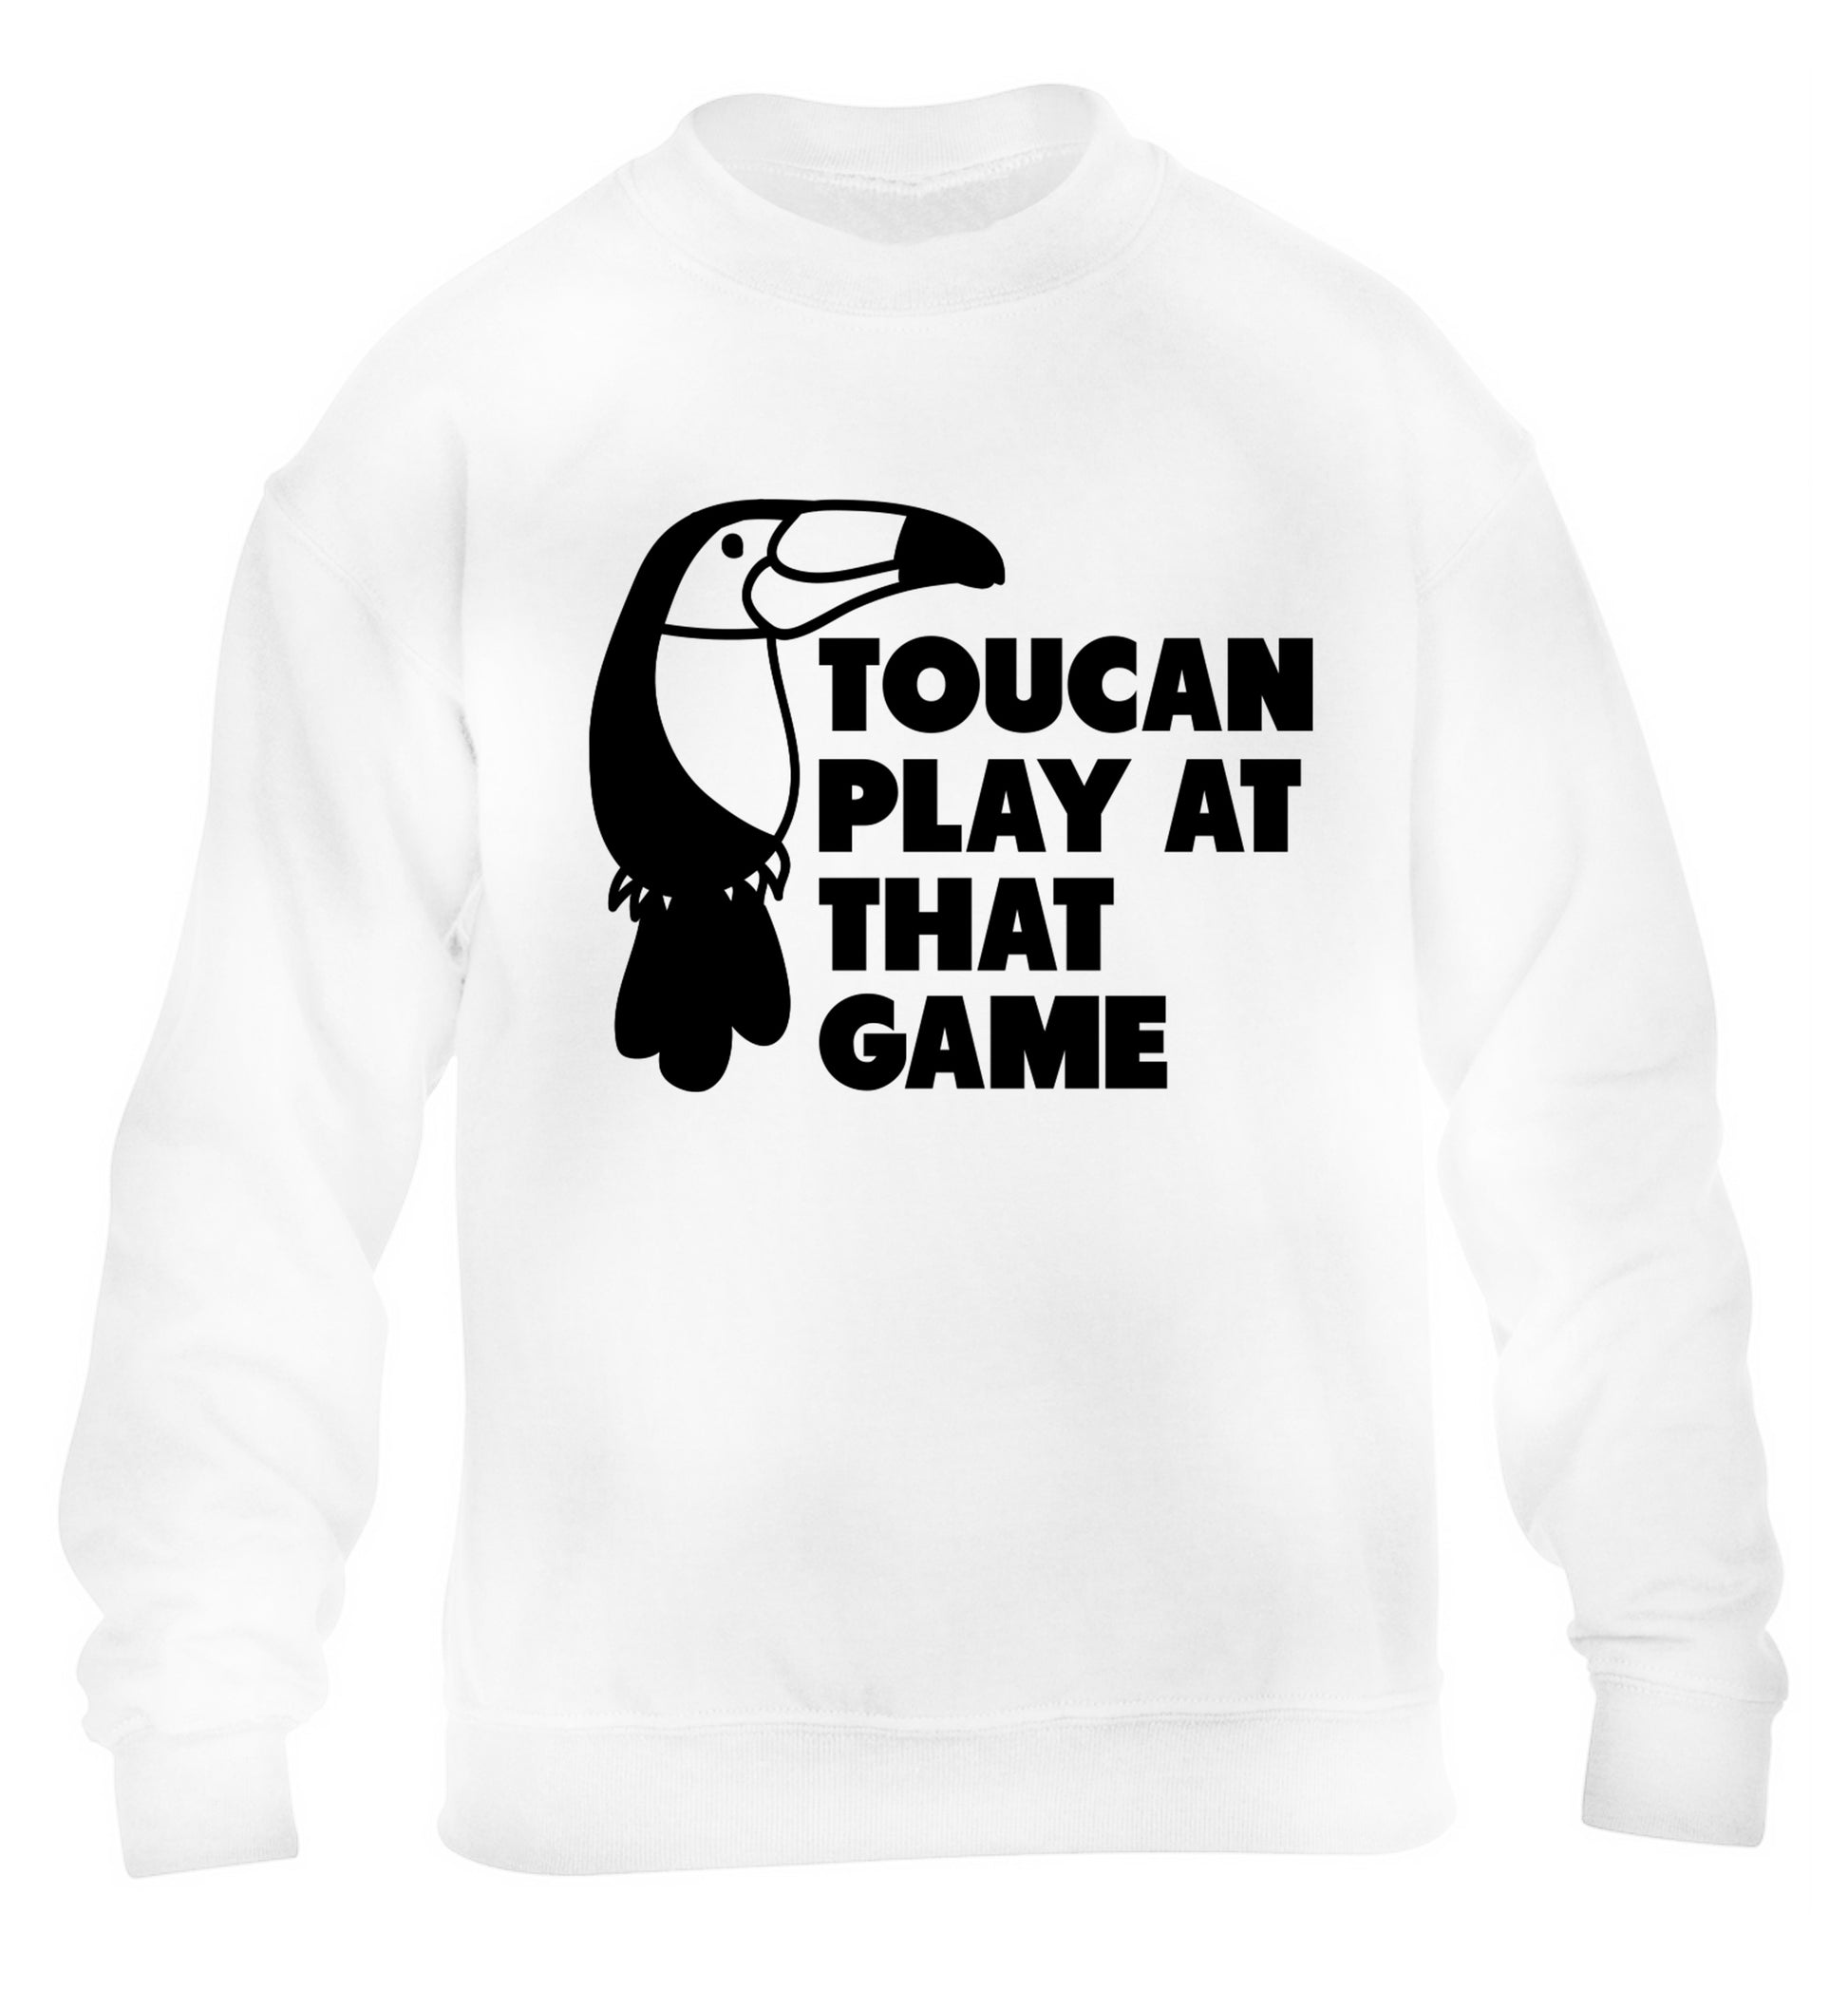 Toucan play at that game children's white sweater 12-13 Years